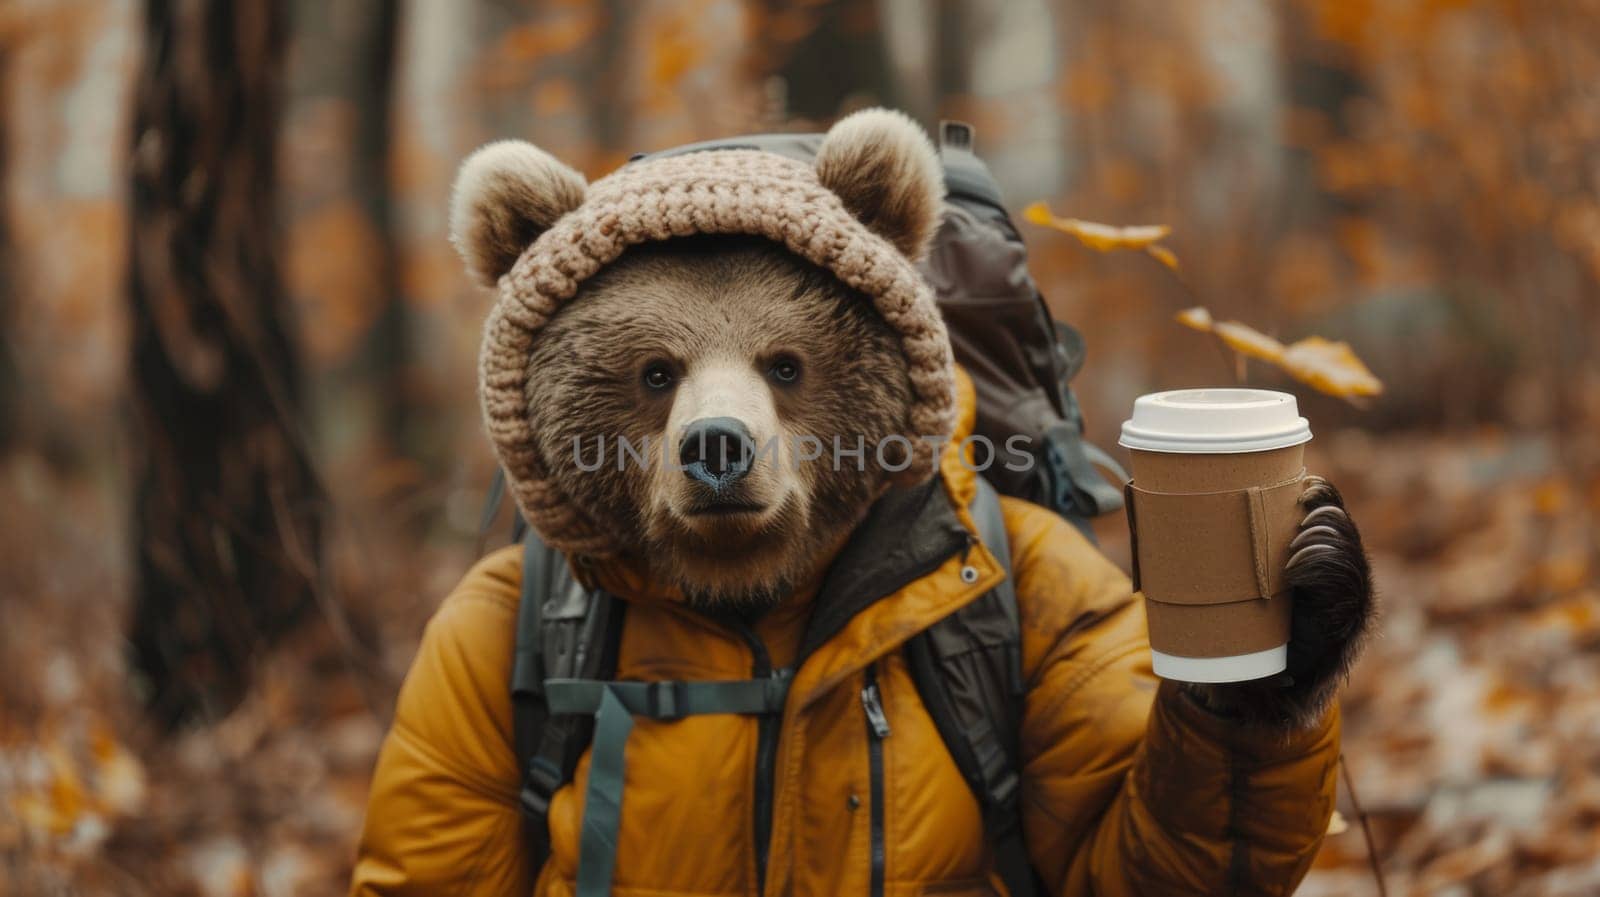 A bear in a winter coat holding up coffee and wearing a hat